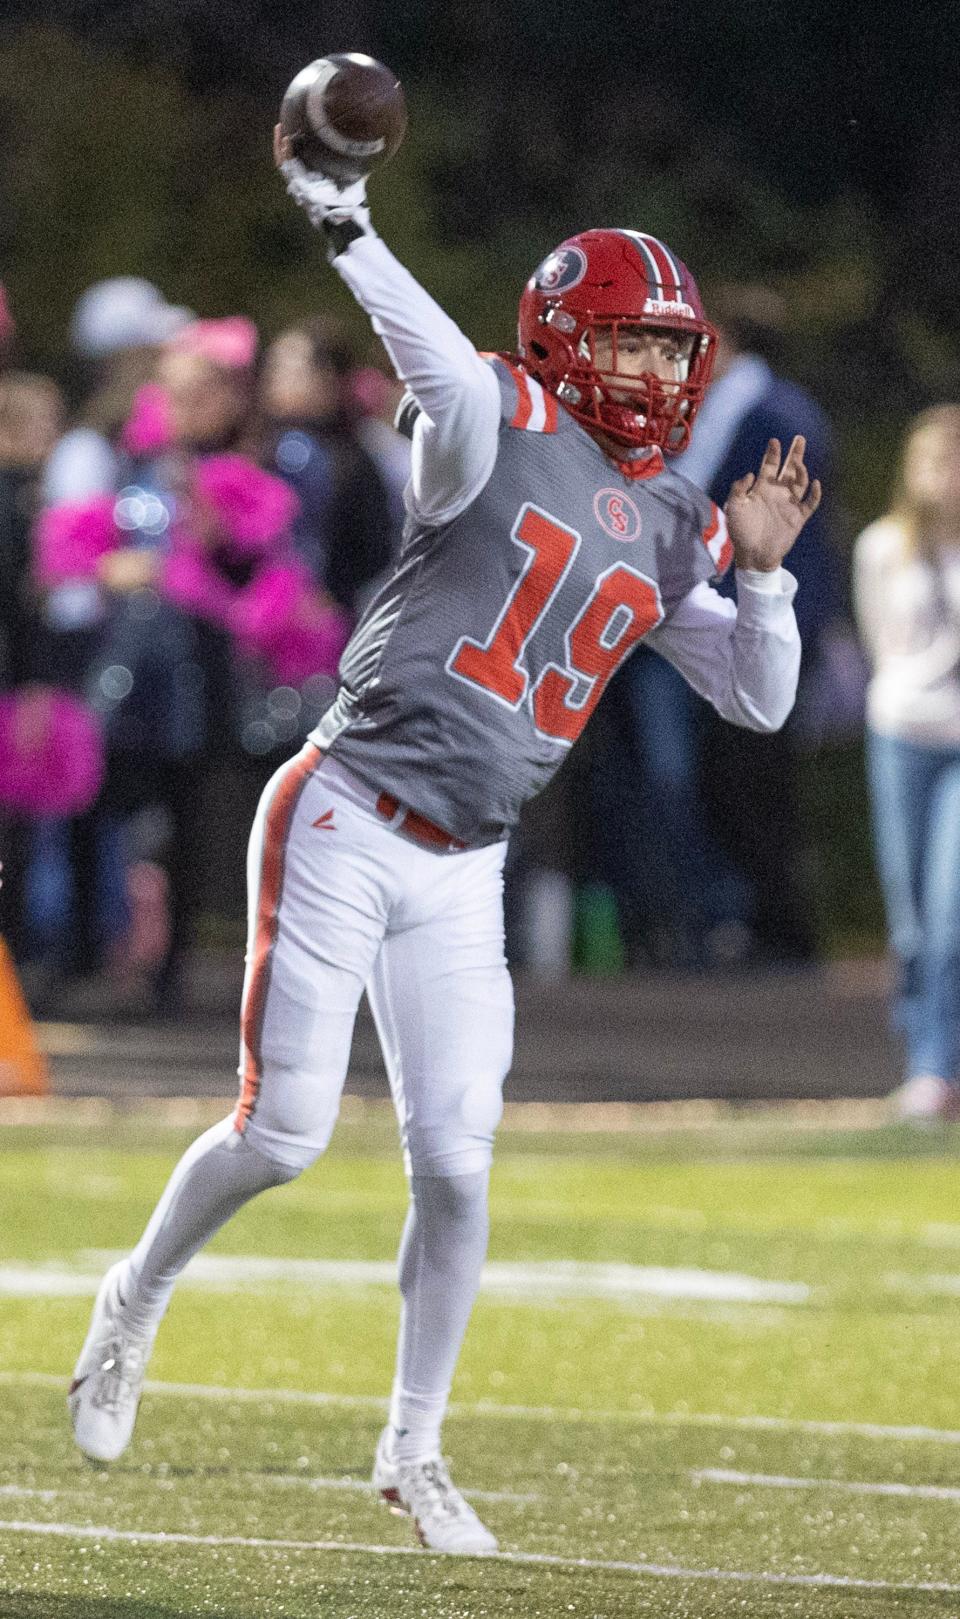 Canton South quarterback Poochie Snyder delivers a pass during Friday's game against Fairless.